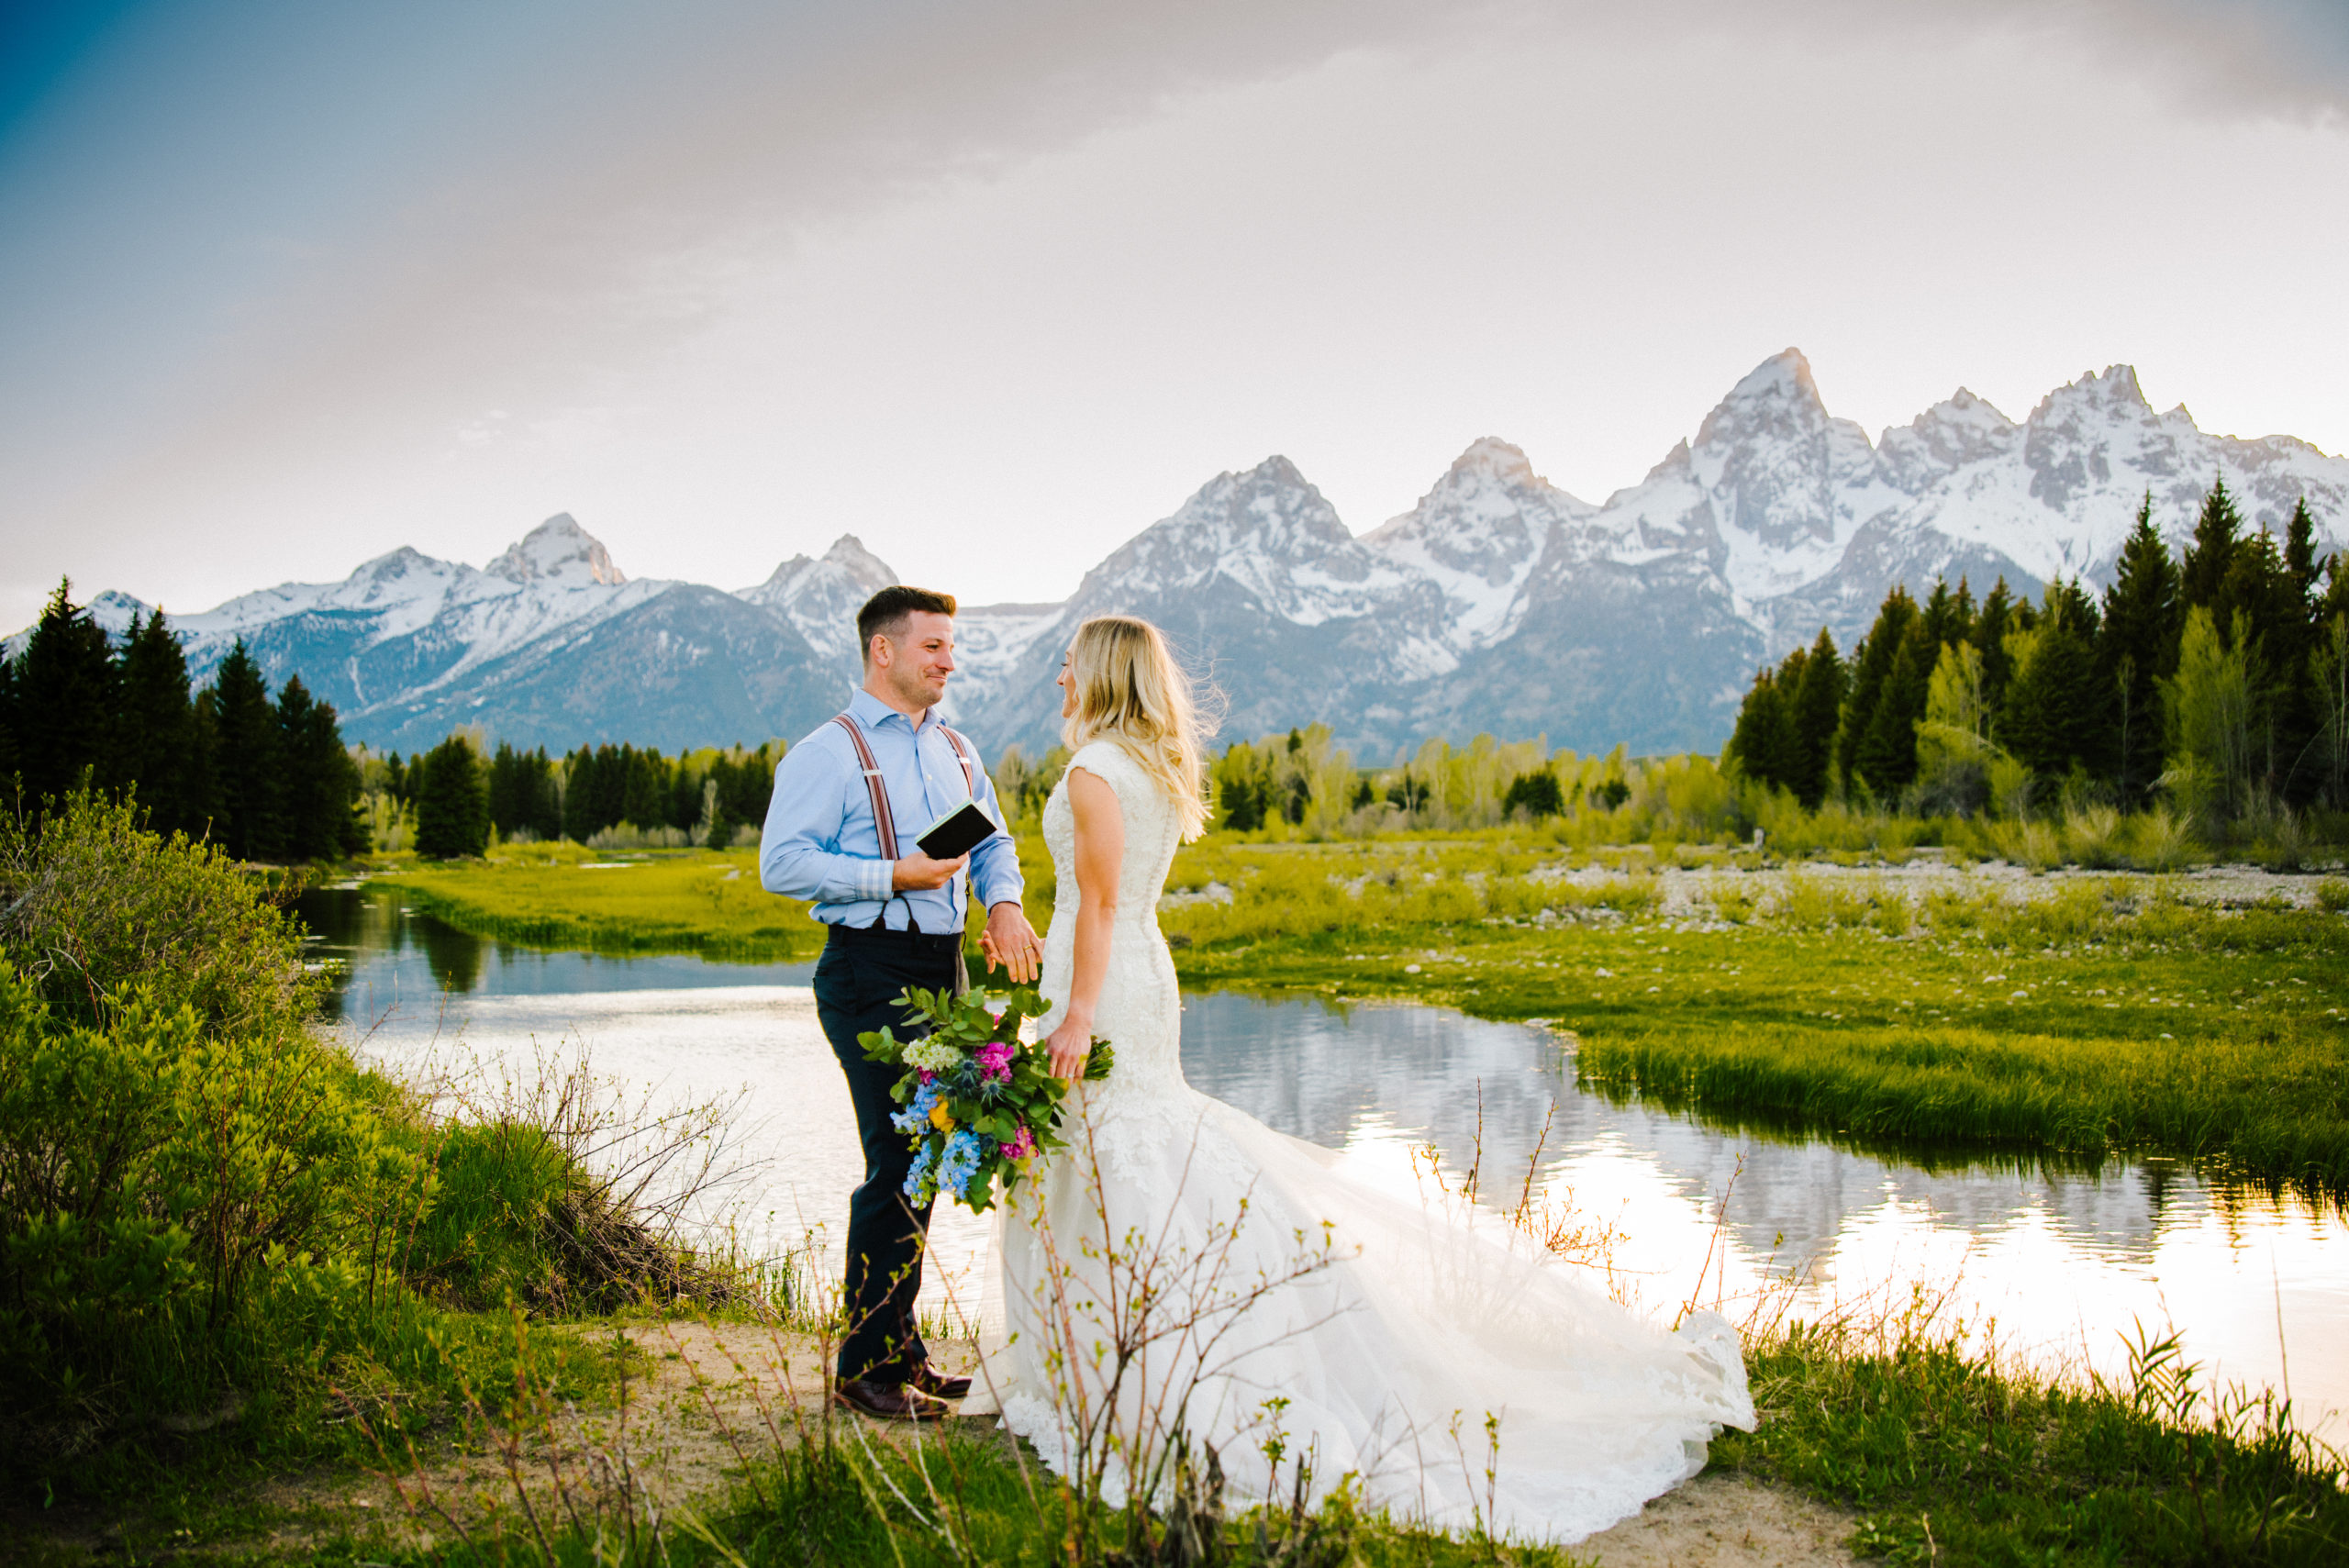 How to elope in grand teton national park